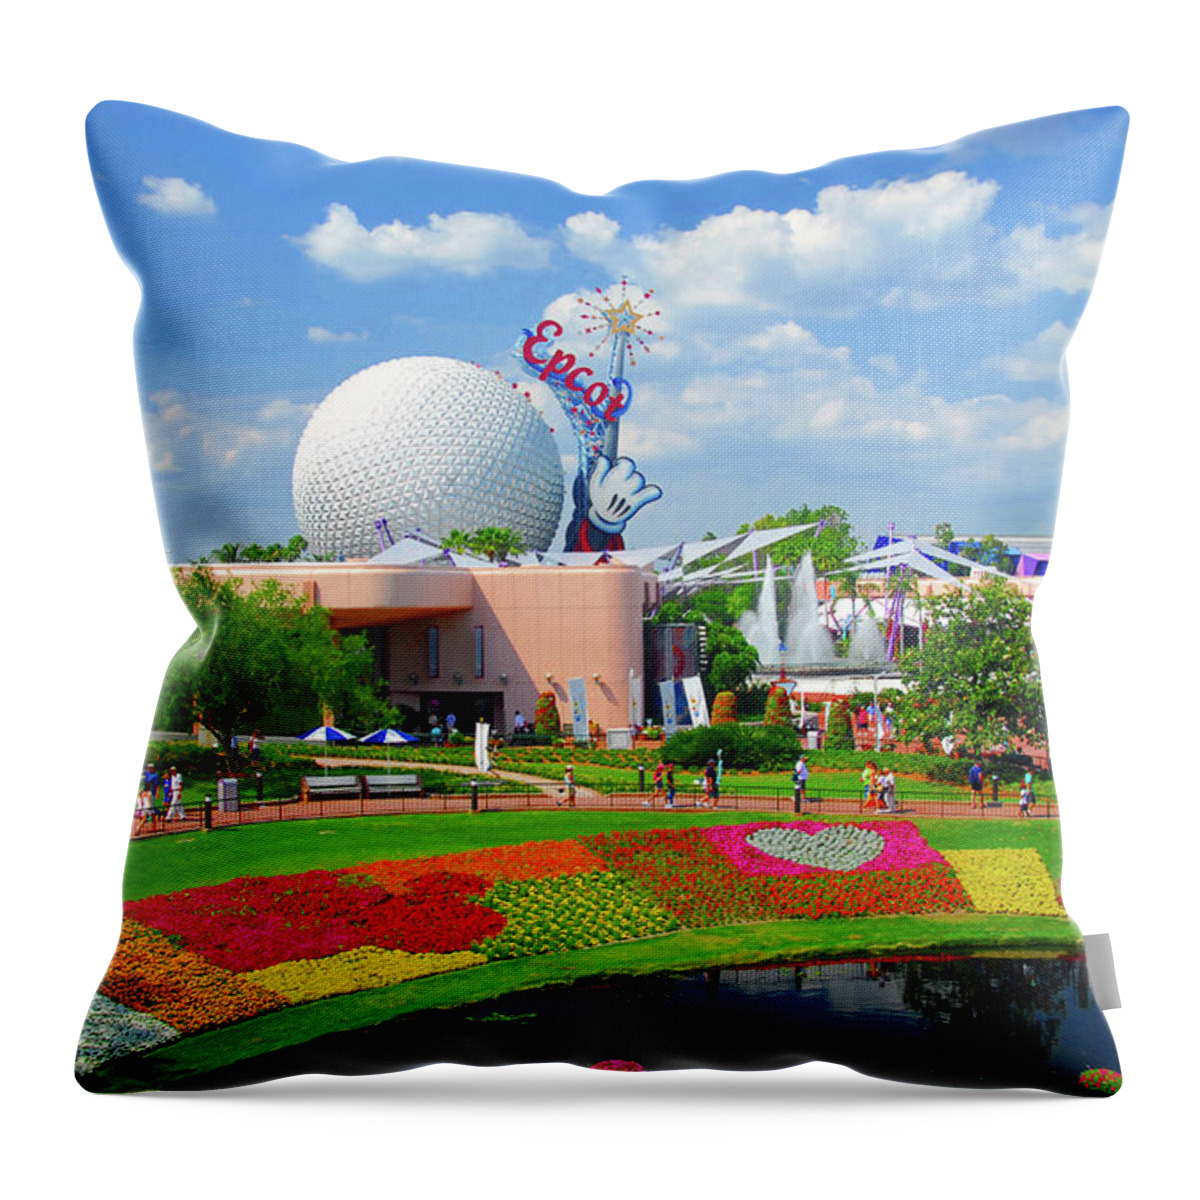 Epcot Throw Pillow featuring the photograph Epcot Spring 2001 by David Lee Thompson